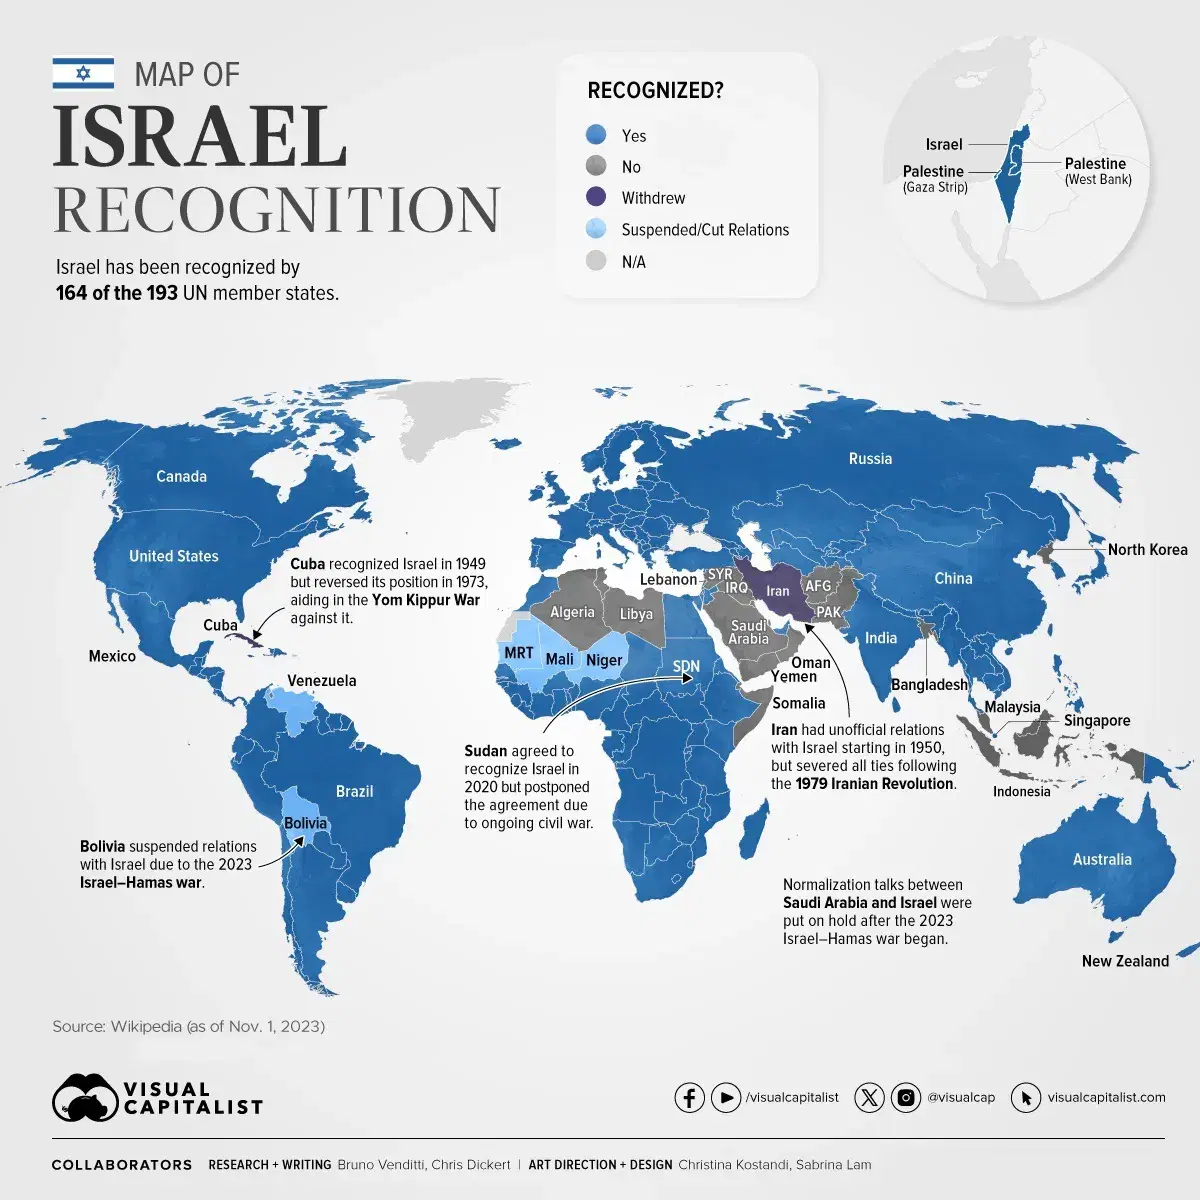 Mapped: Recognition of Israel by Country